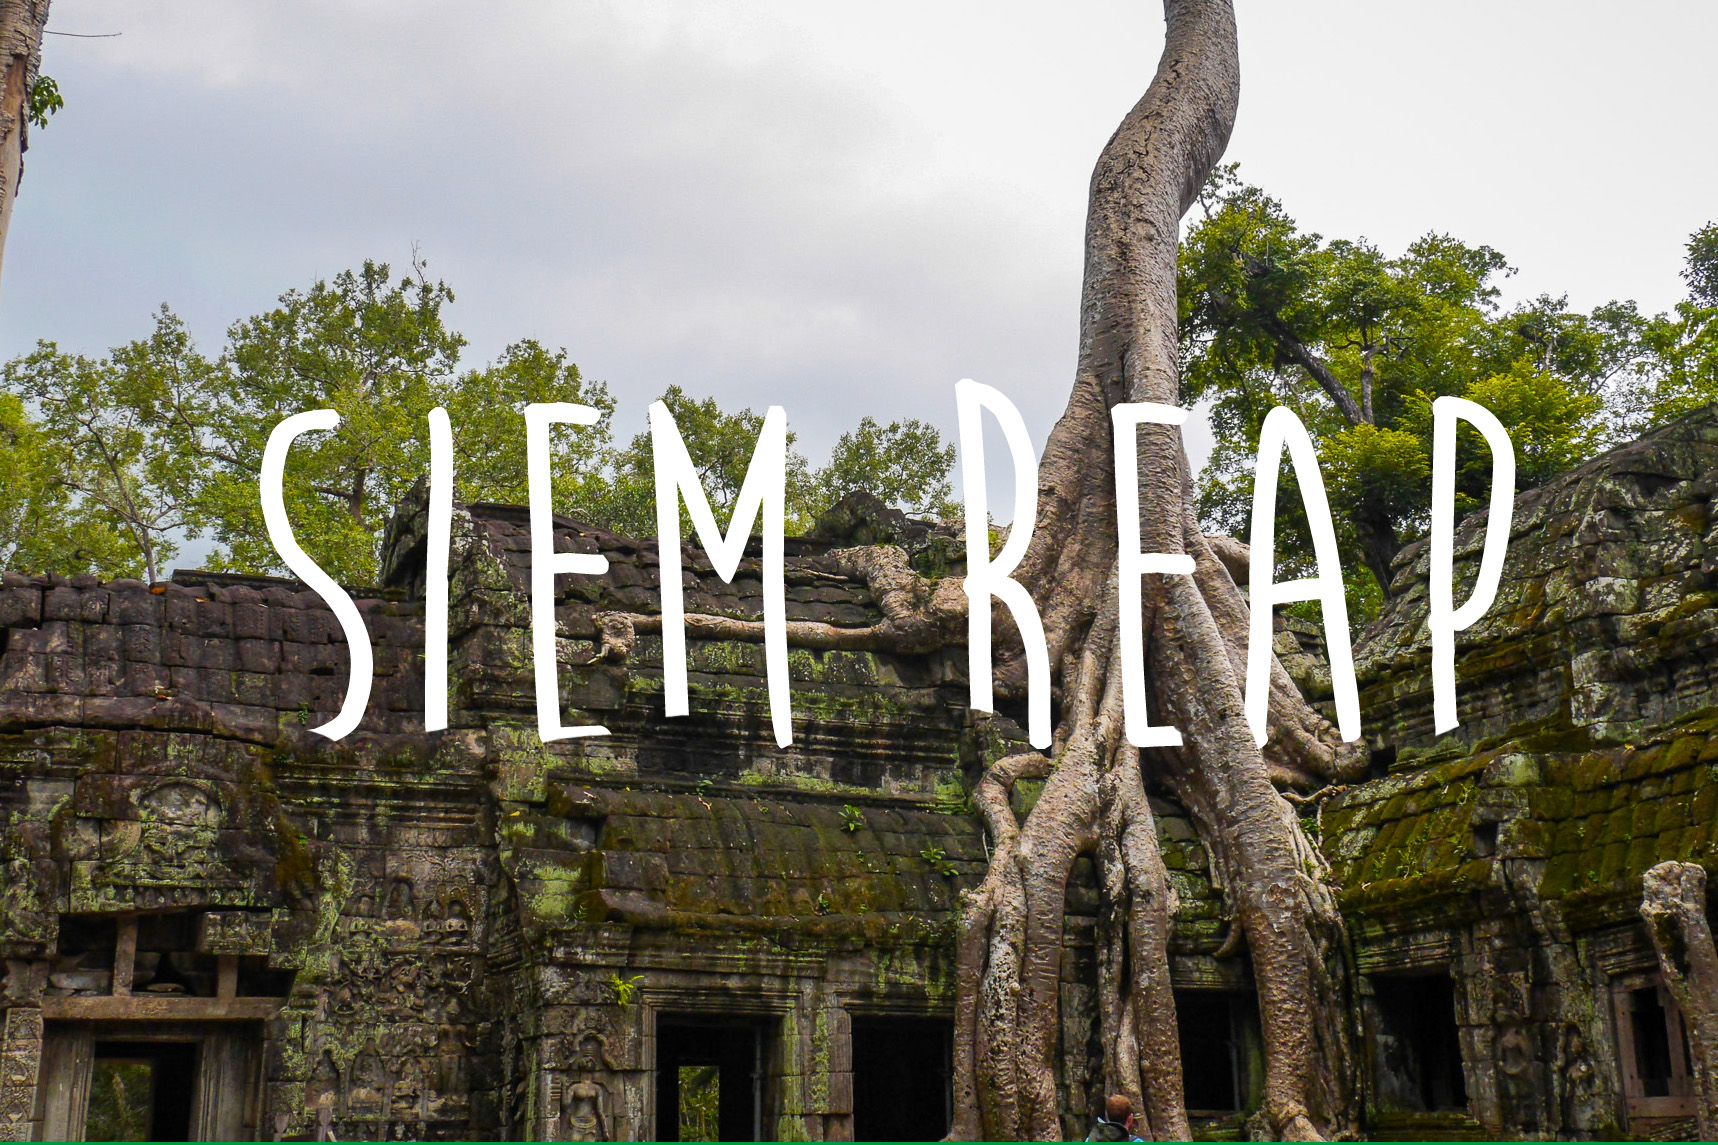 Siem Reap and The Angkor Temples